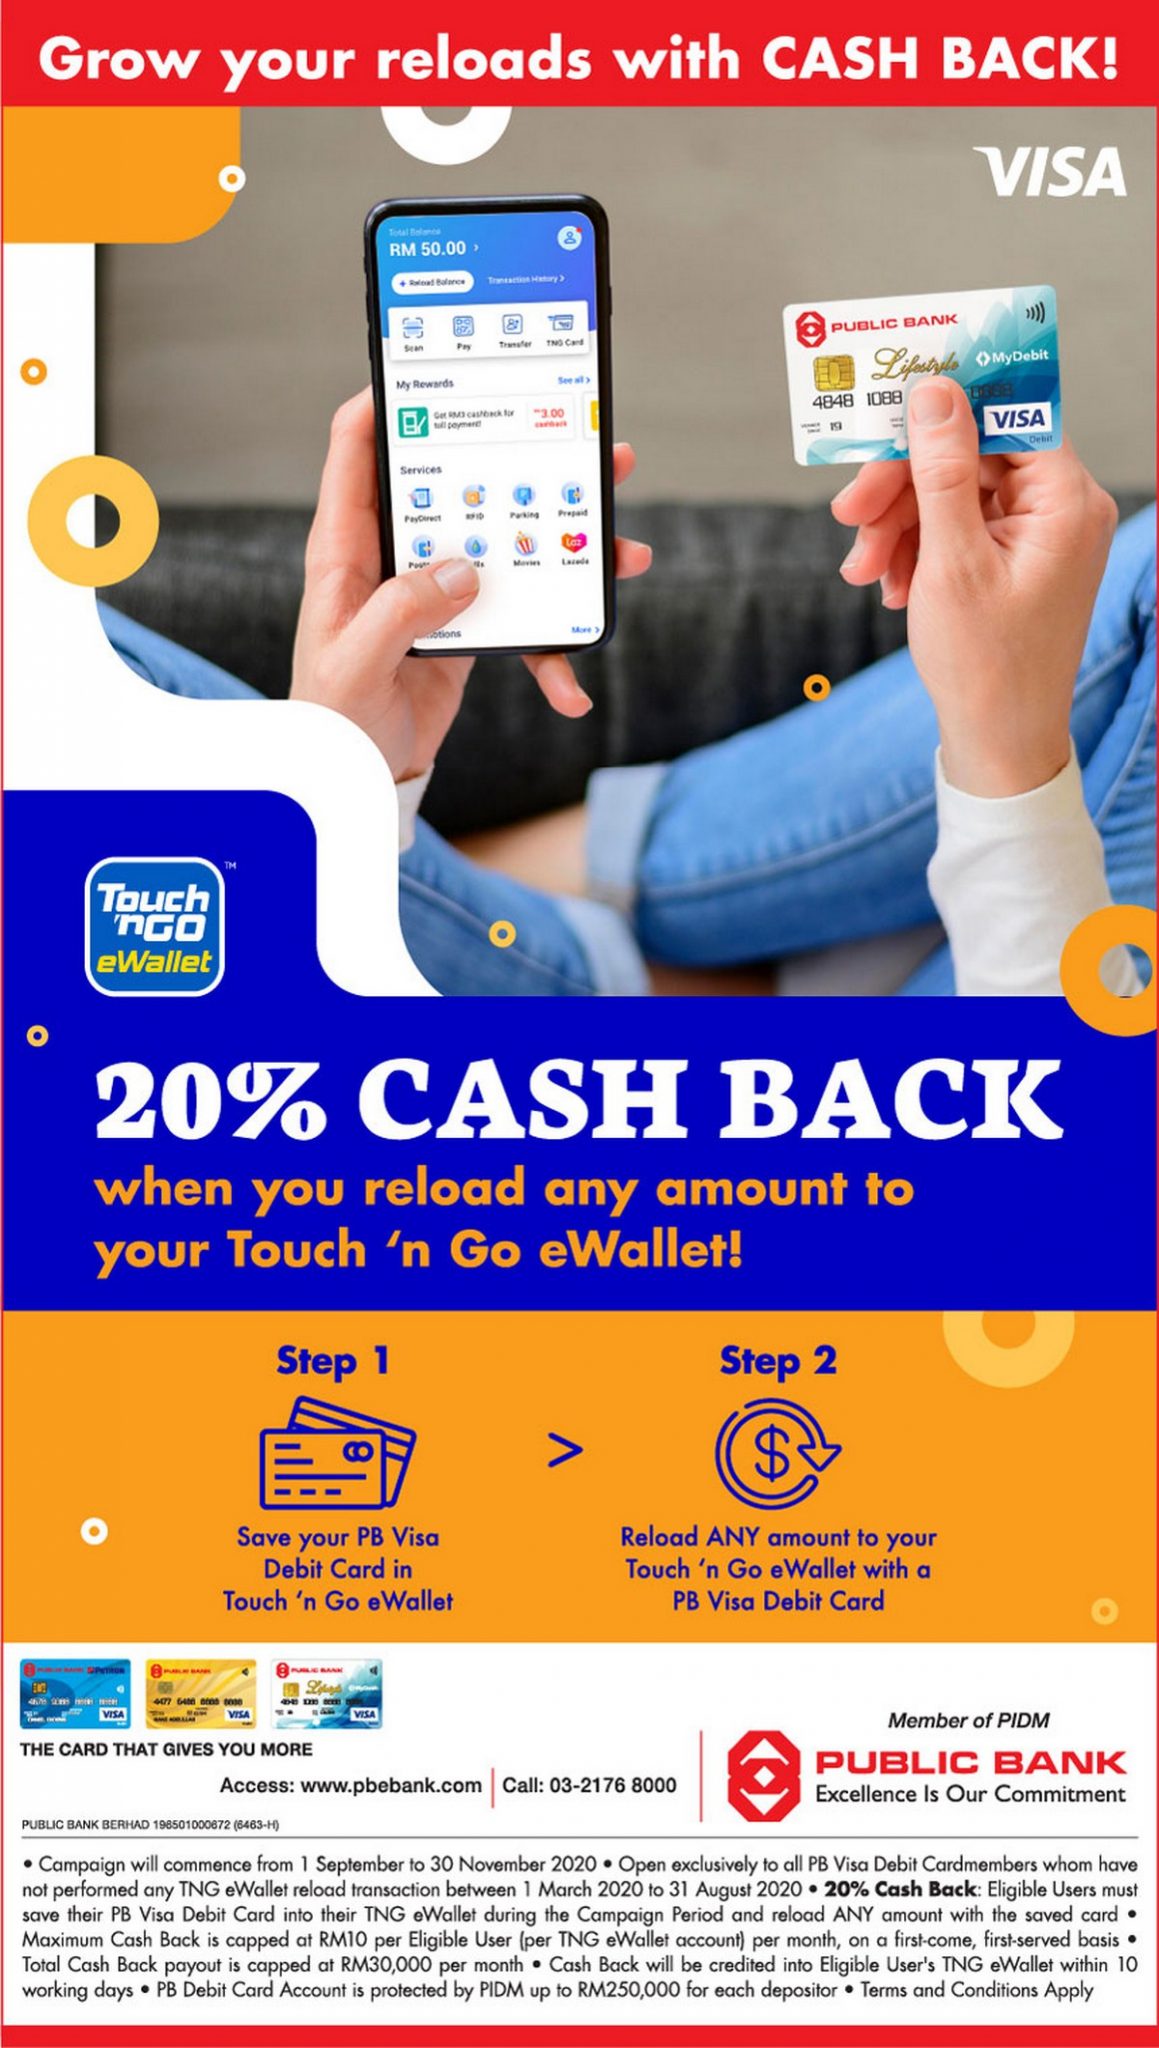 Public Bank With 20% Cash Back When Reload on Touch n' Go ...